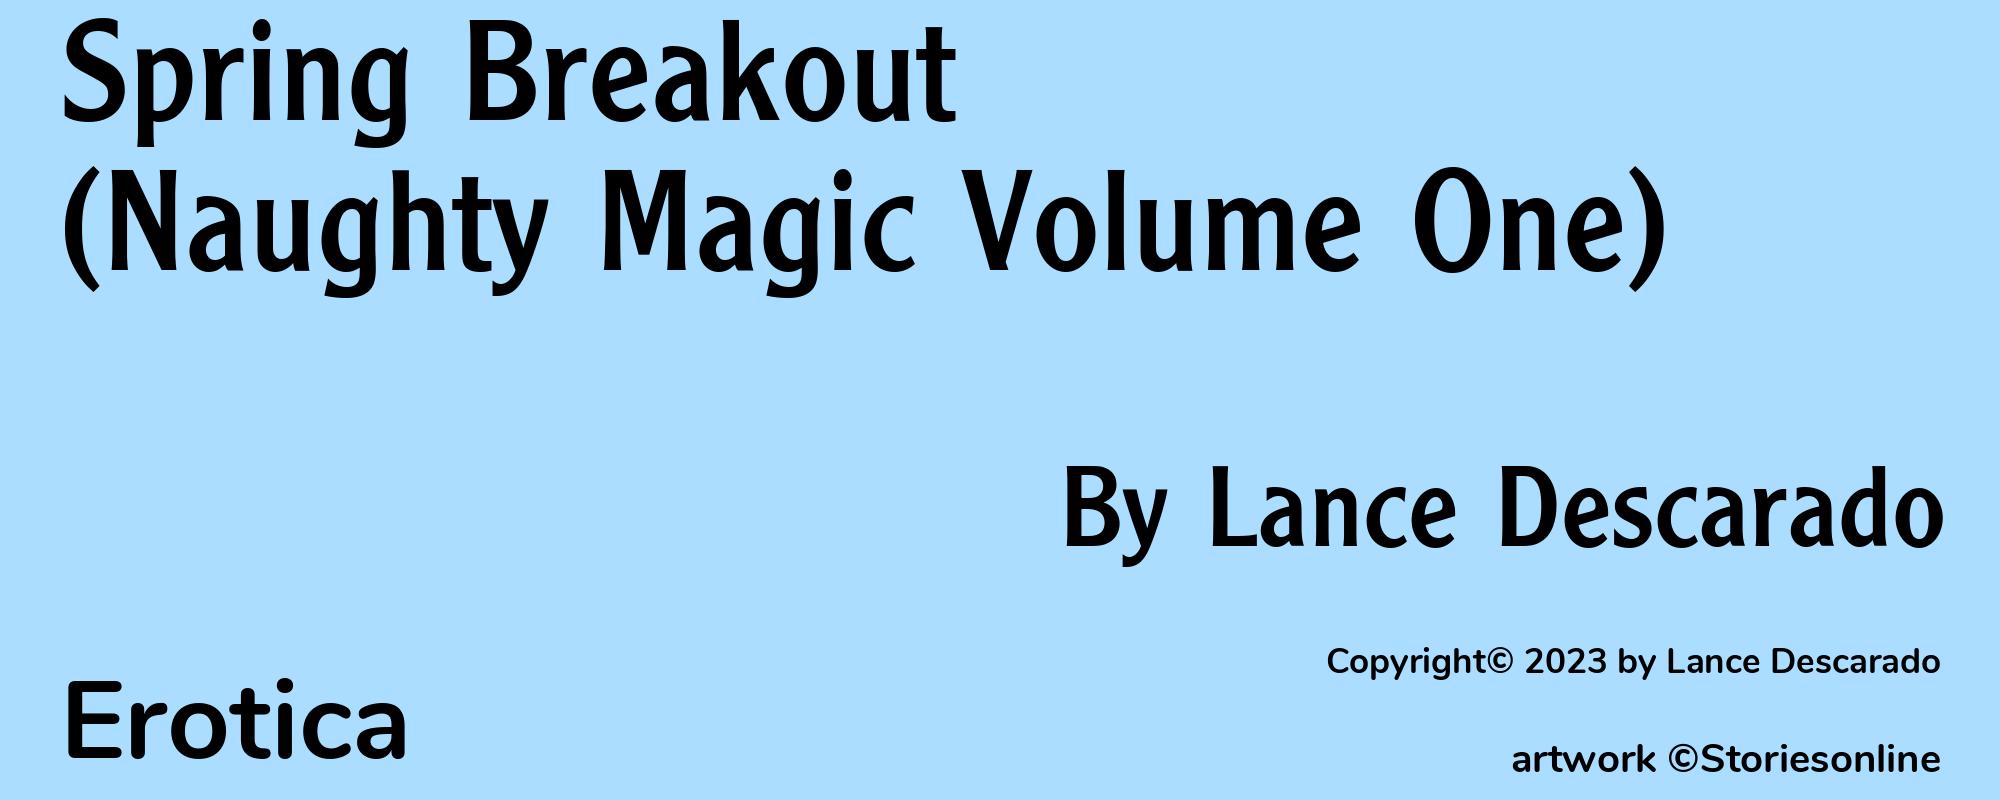 Spring Breakout (Naughty Magic Volume One) - Cover